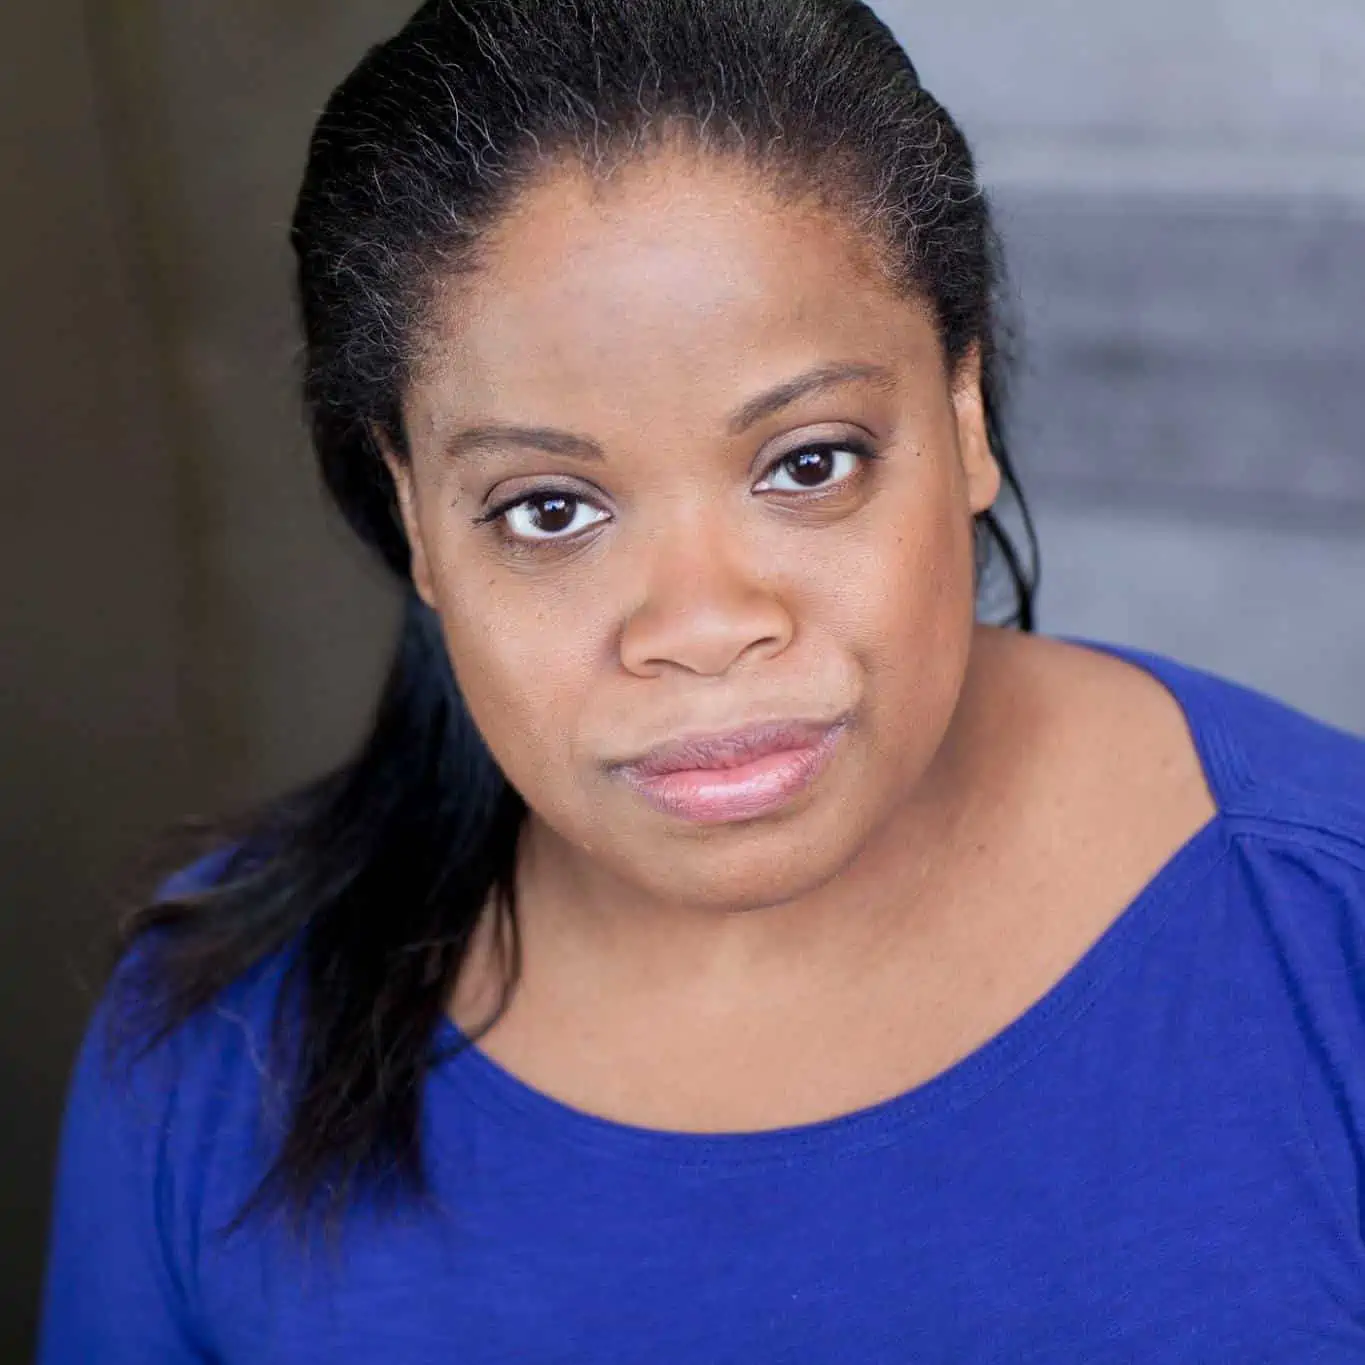 Terri - A brown skinned Black woman with shoulder length straight dark hair, greying around the edges and swept over one shoulder, looks straight into the camera with a mostly serious expression and slight smile. She is wearing an indigo shirt.